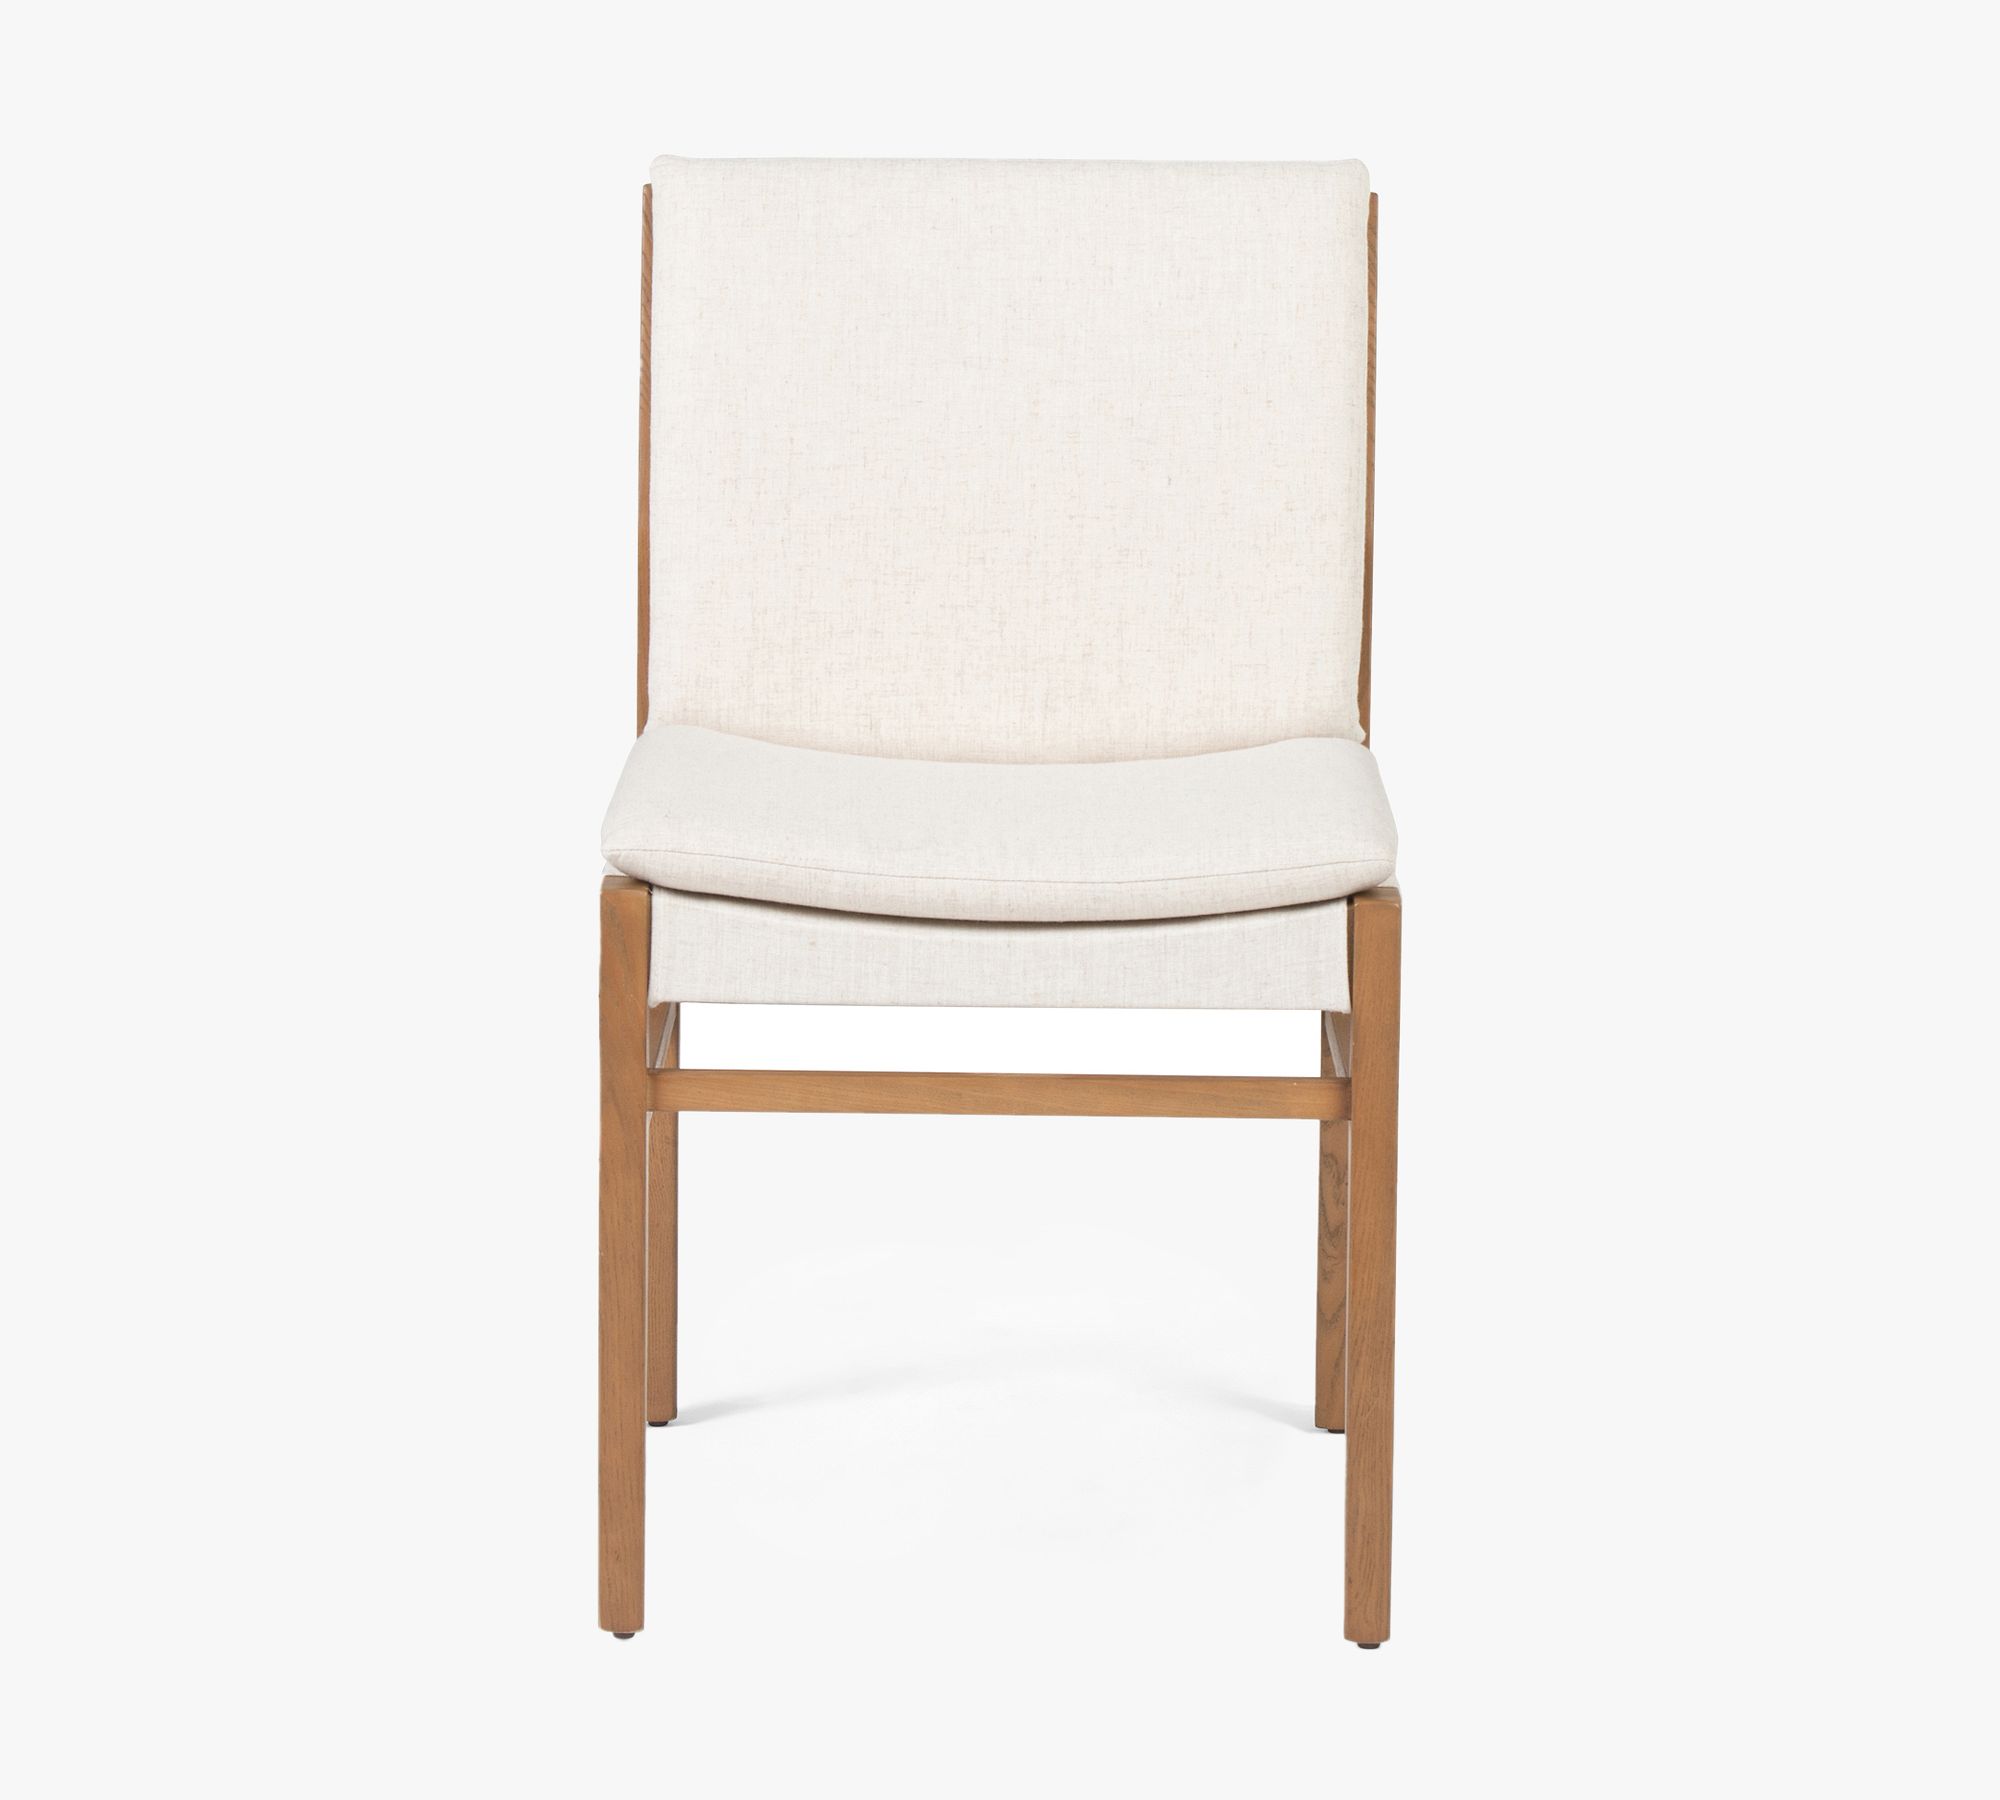 Reese Upholstered Dining Chair - Set of 2